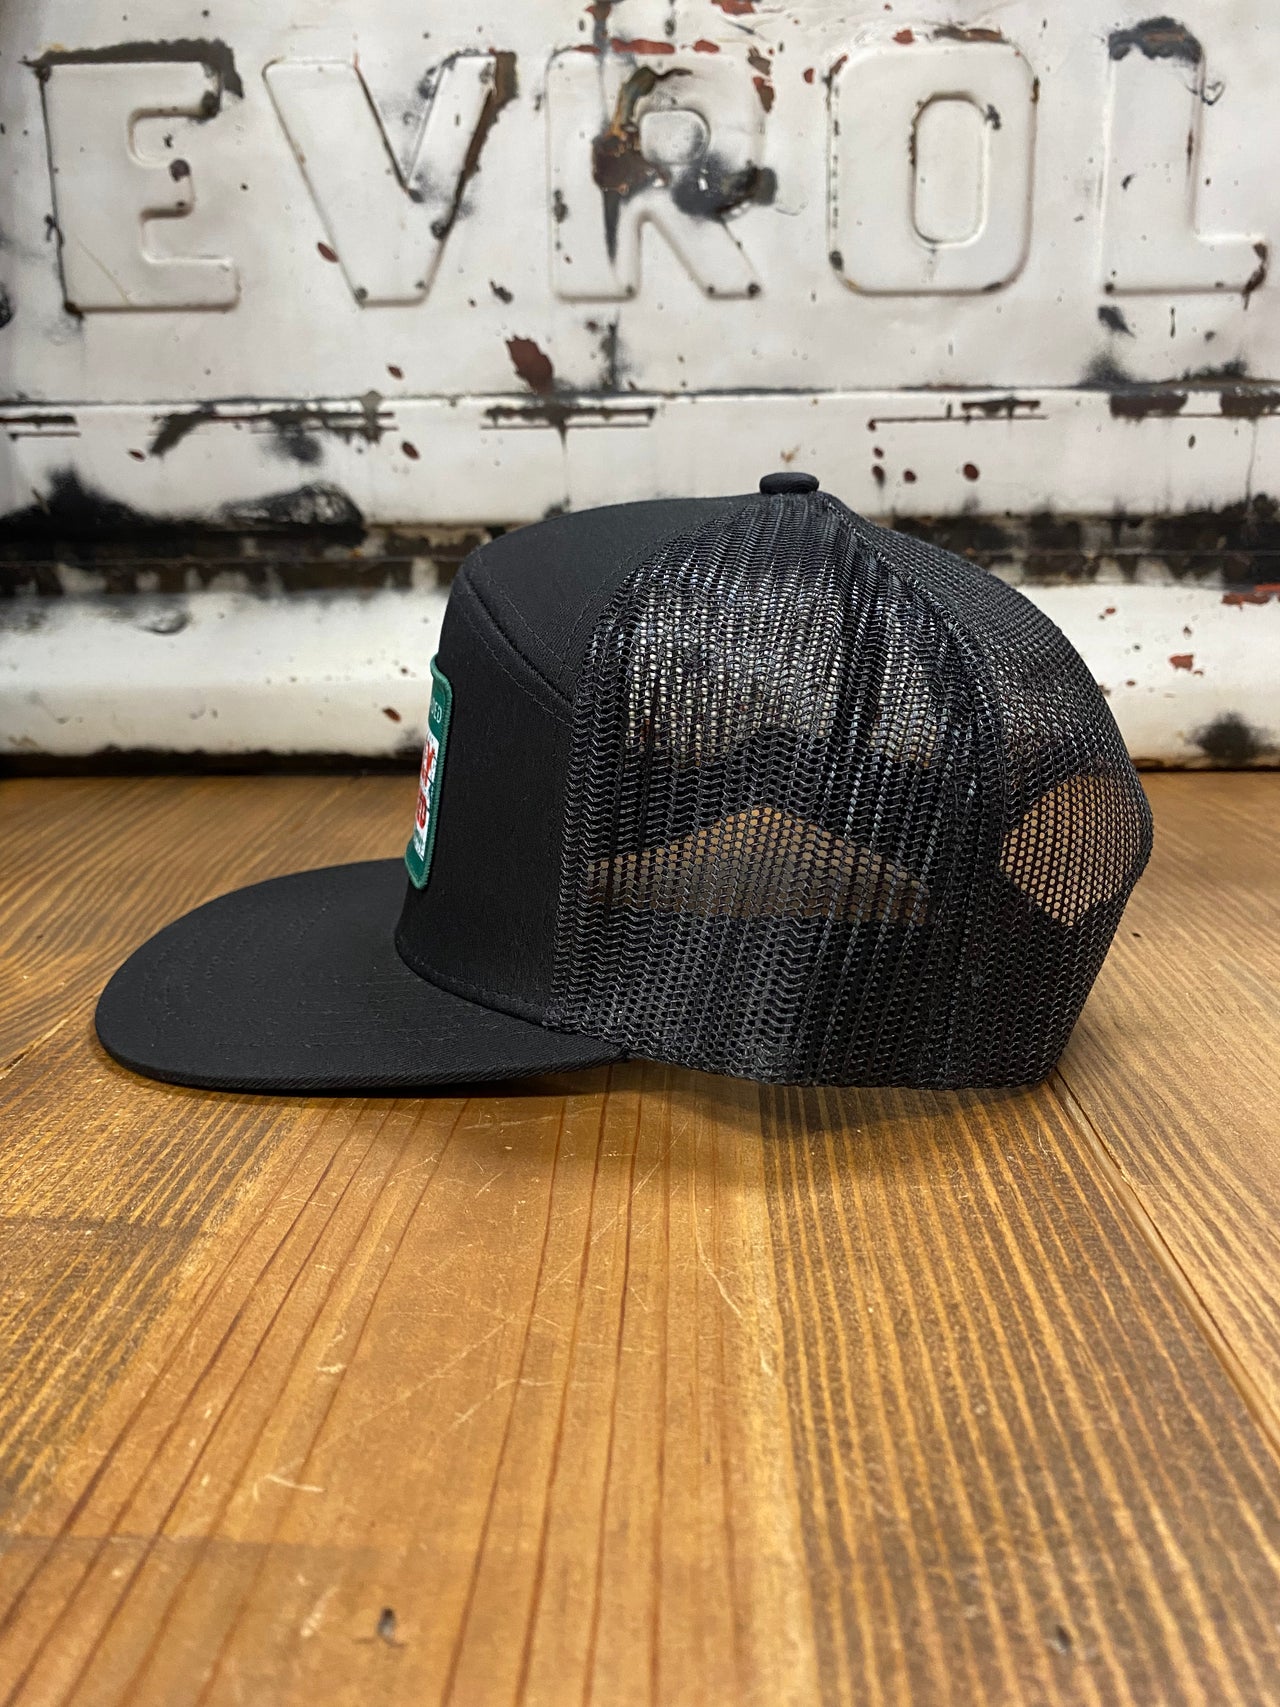 Fully Flocked Black Snapback: A sleek 7-panel cap with a black snapback design, featuring a vibrant red man logo embroidered patch. The epitome of urban sophistication and individual style."